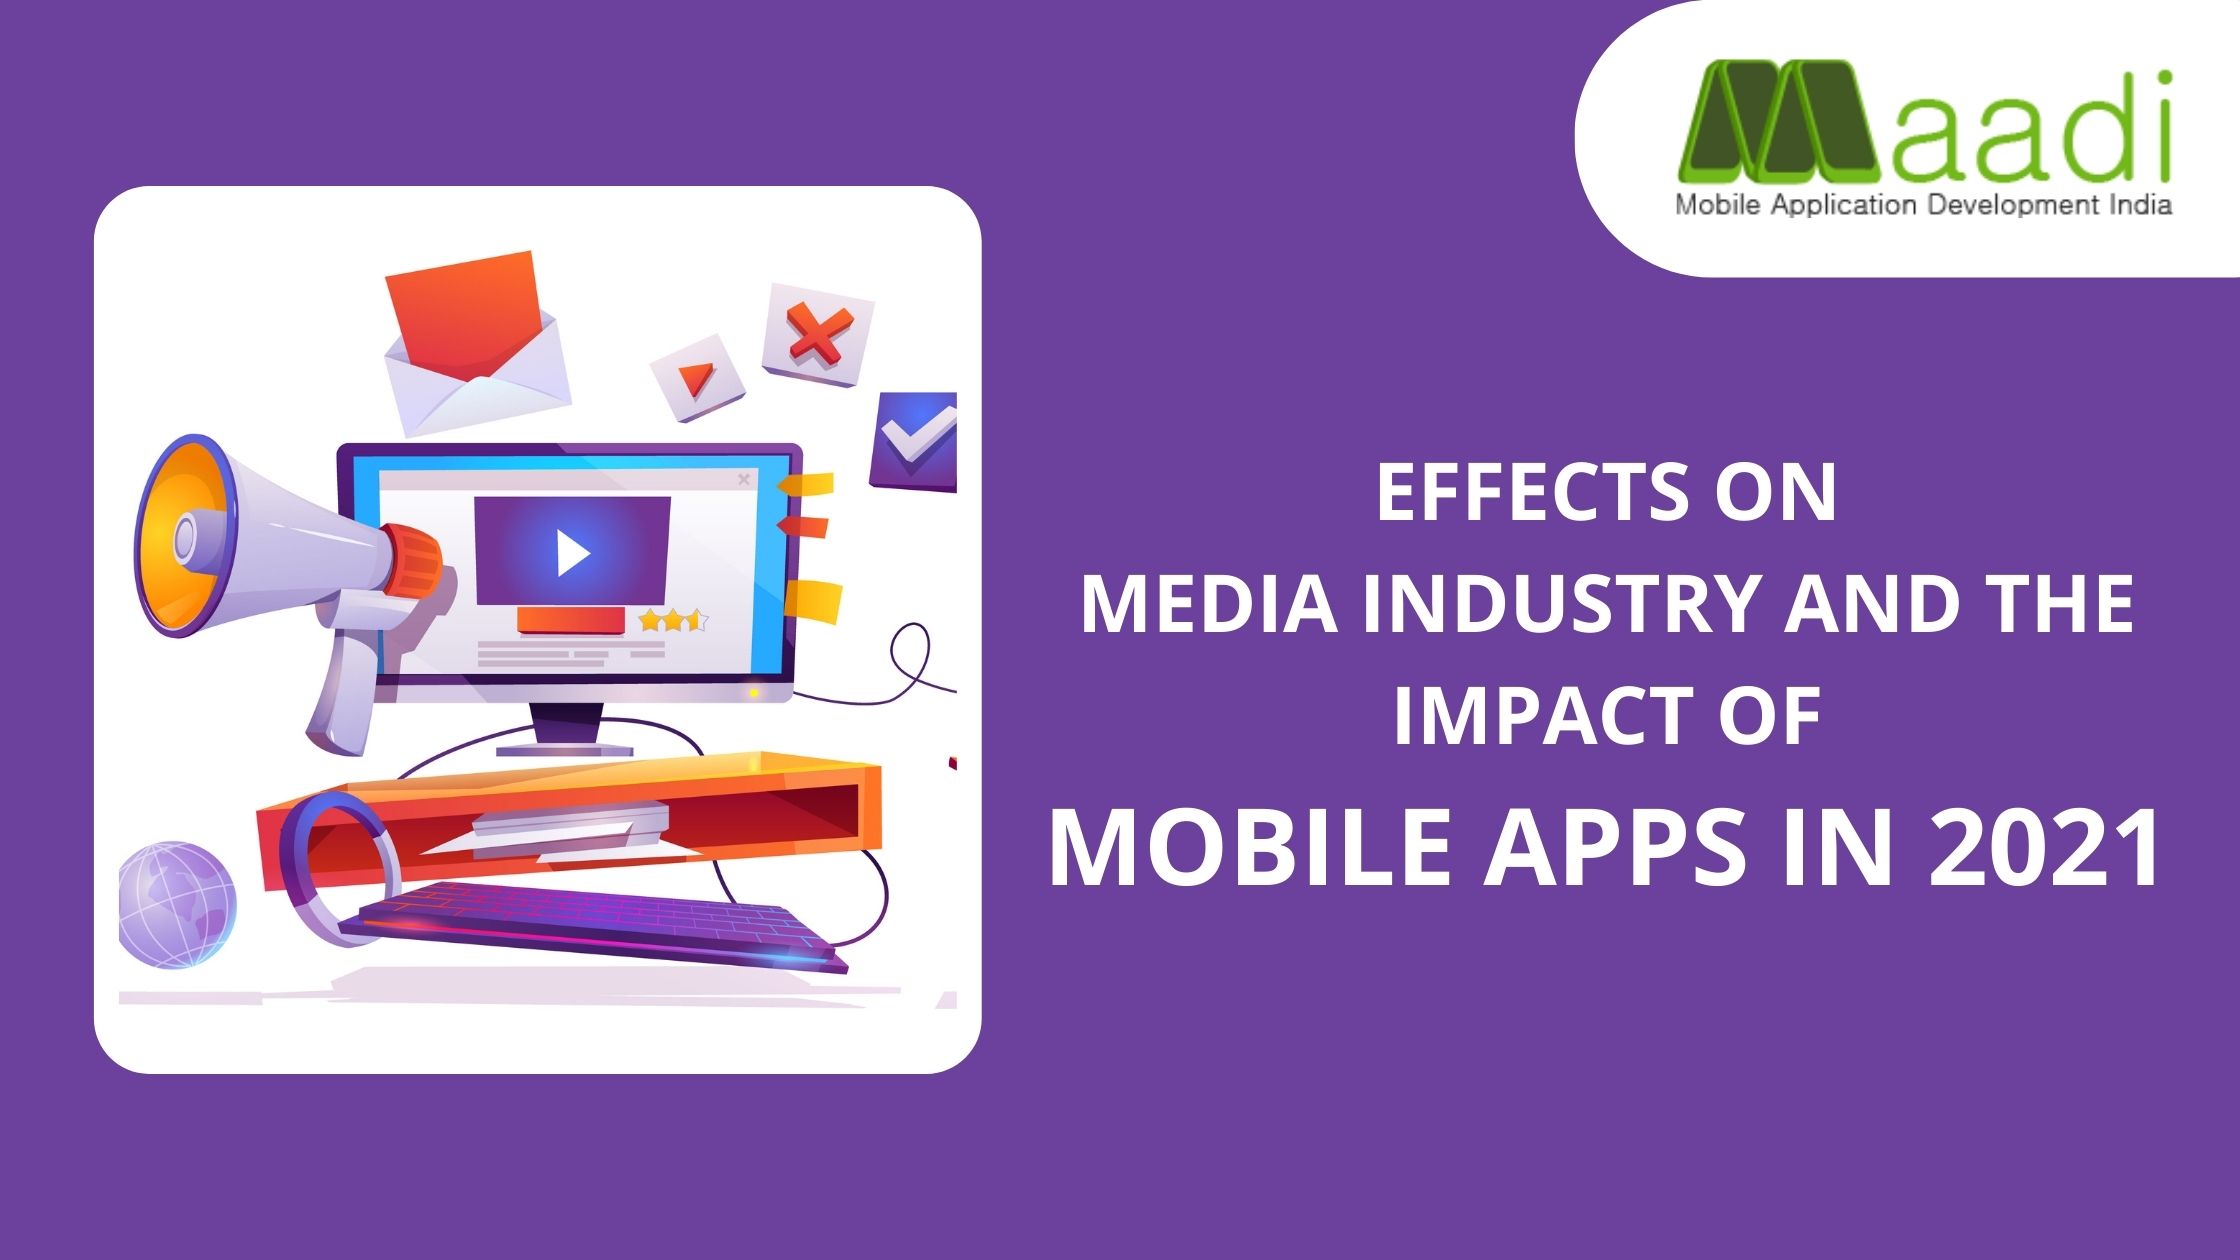 Effects on Media Industry and the Impact of Mobile Apps in 2021